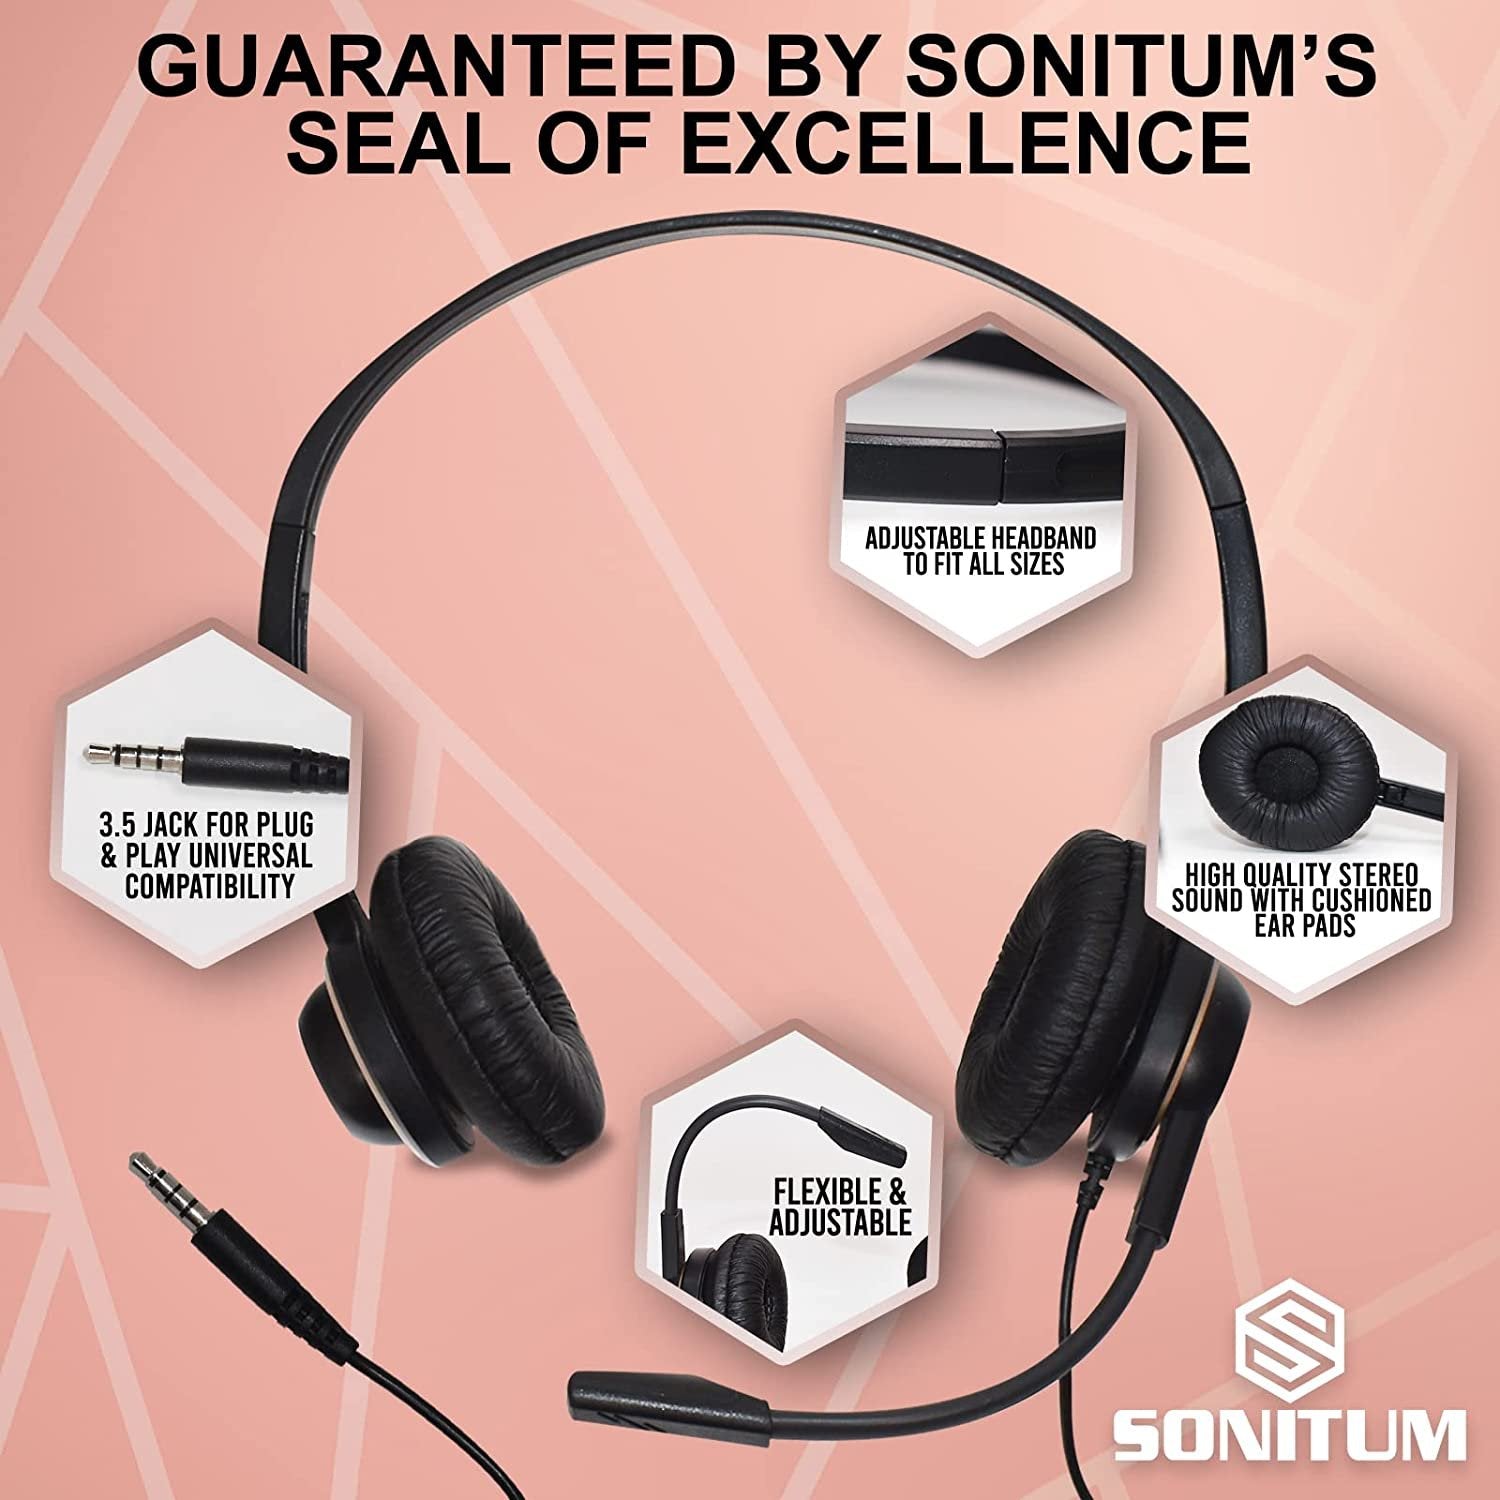 Sonitum PC Headset with Noise-Canceling Mic - Comfortable Over-Ear Headphones for Office, Meetings, Chat - 3.5 Jack, Universal Connectivity - Black (1 Pack)